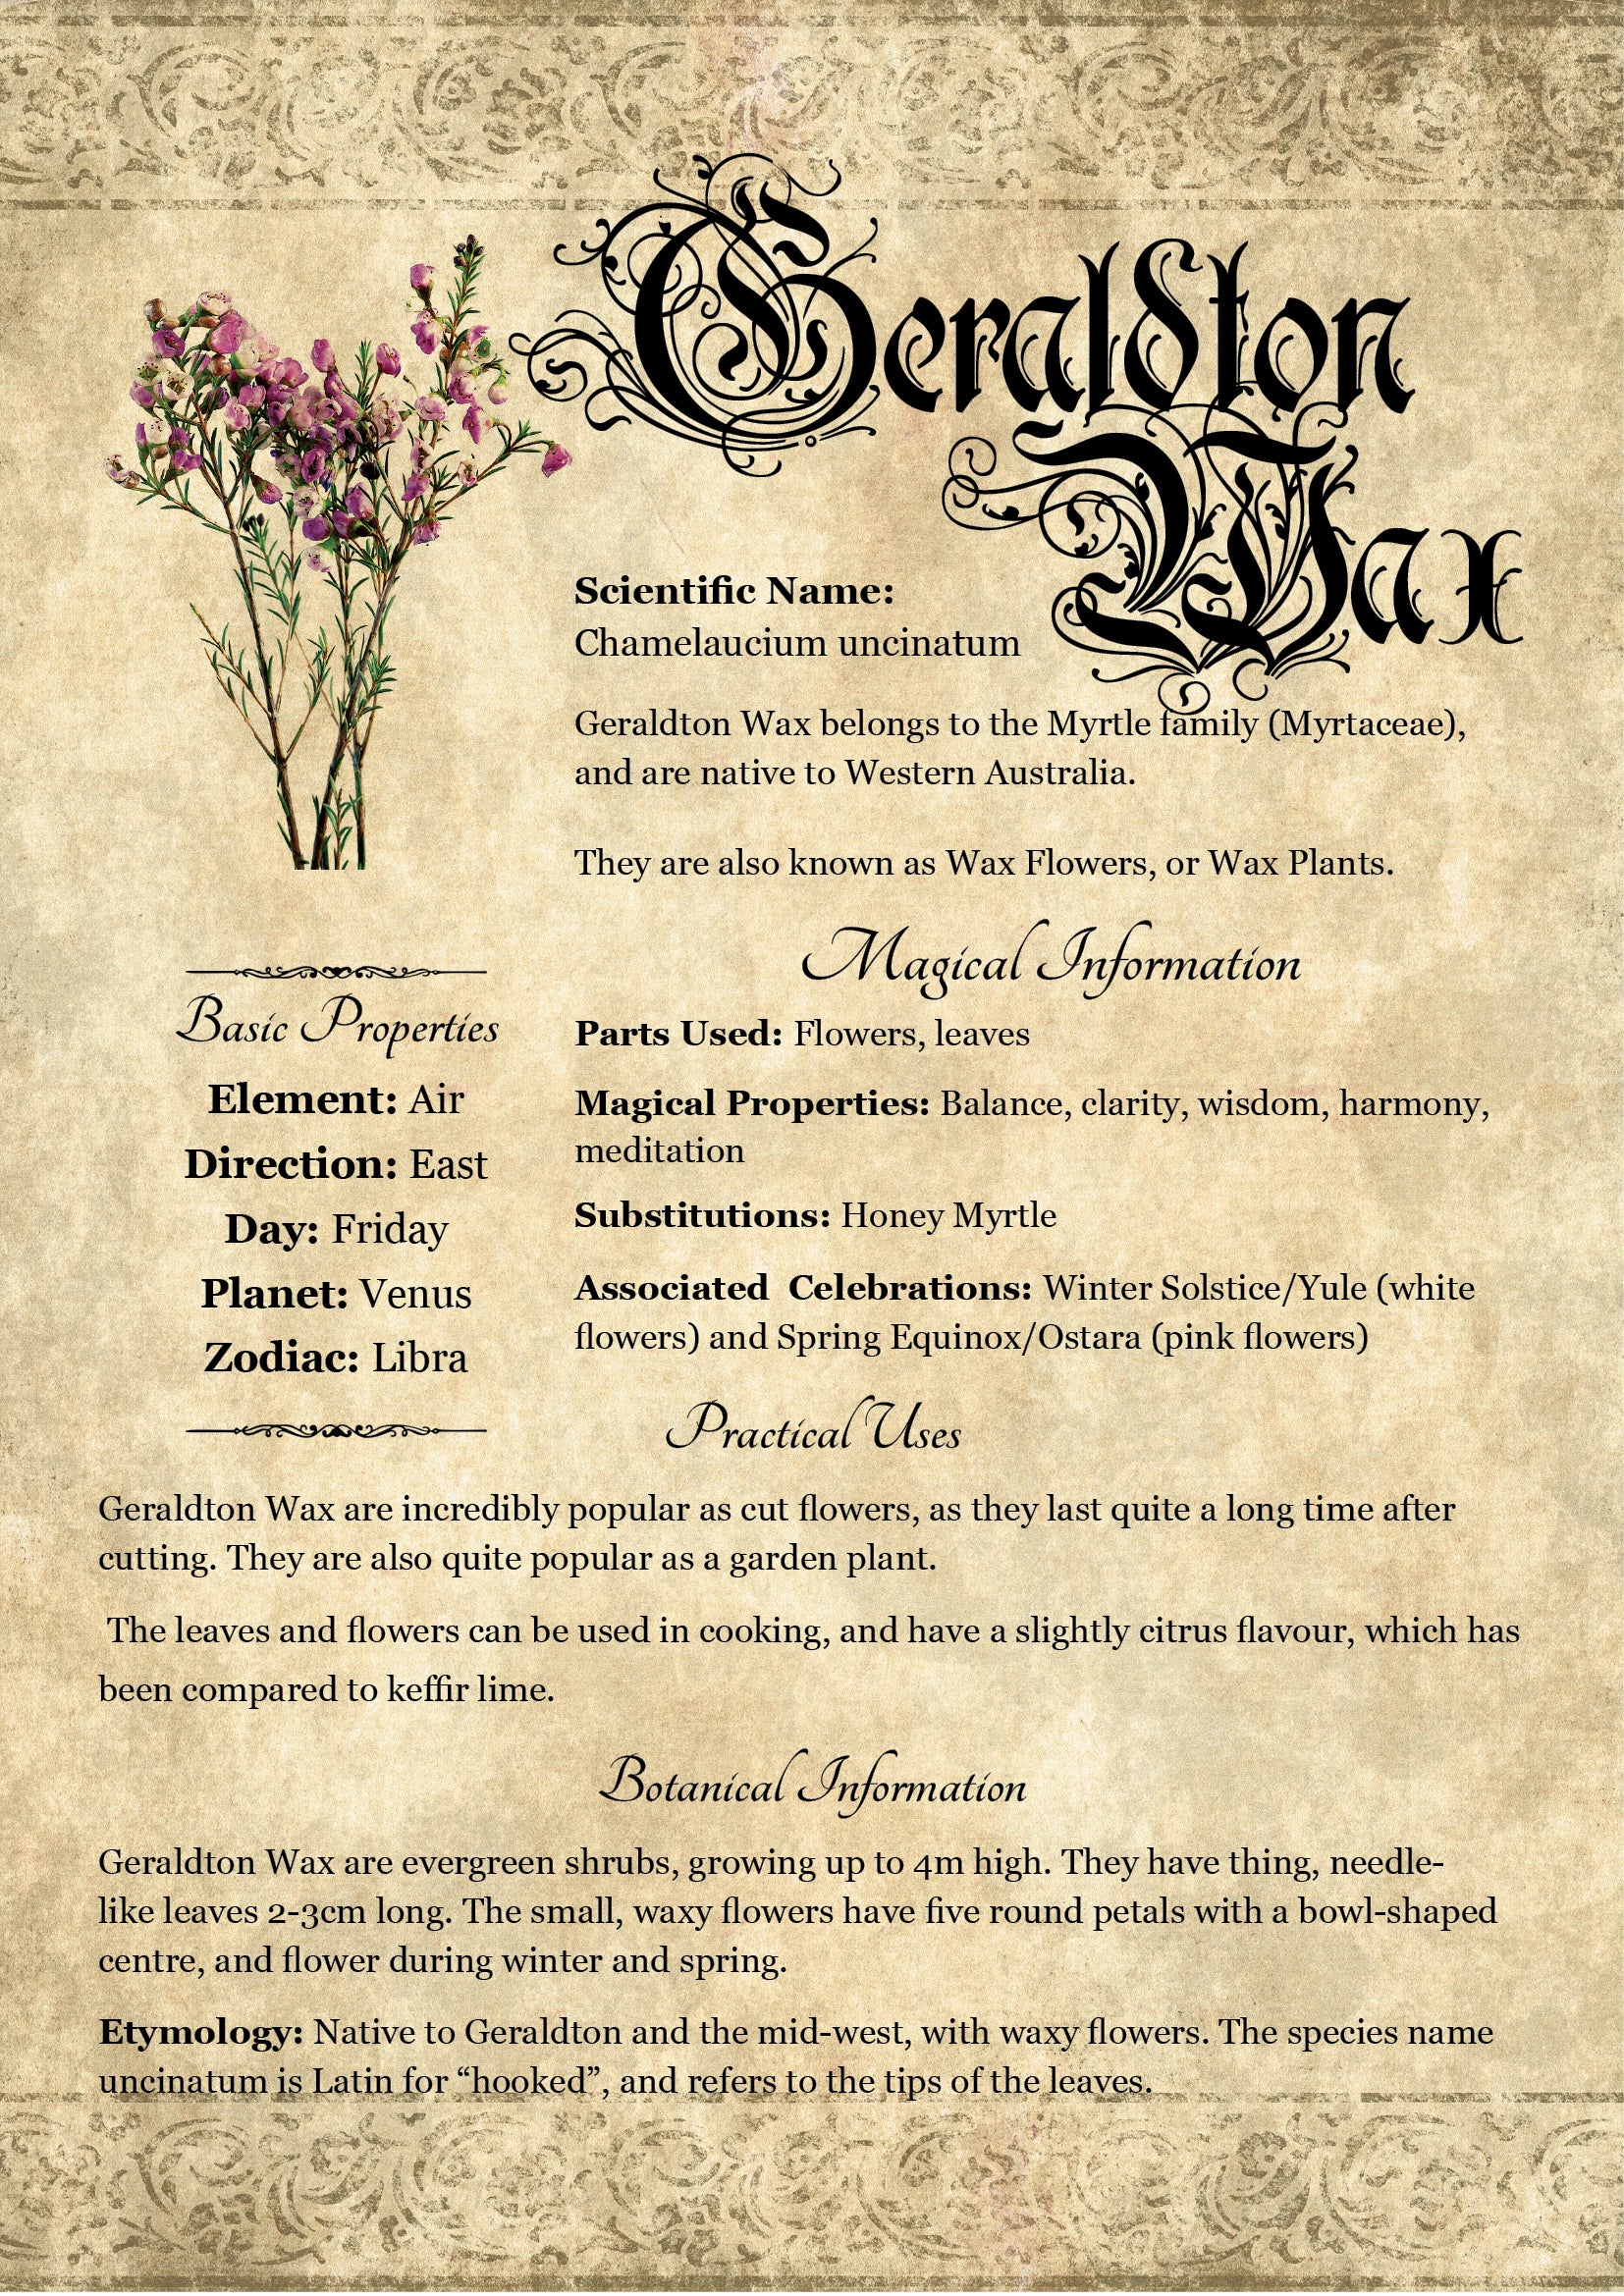 Antique-style grimoire page on the properties of Geraldton Wax, with an aged paper background and readable serif font